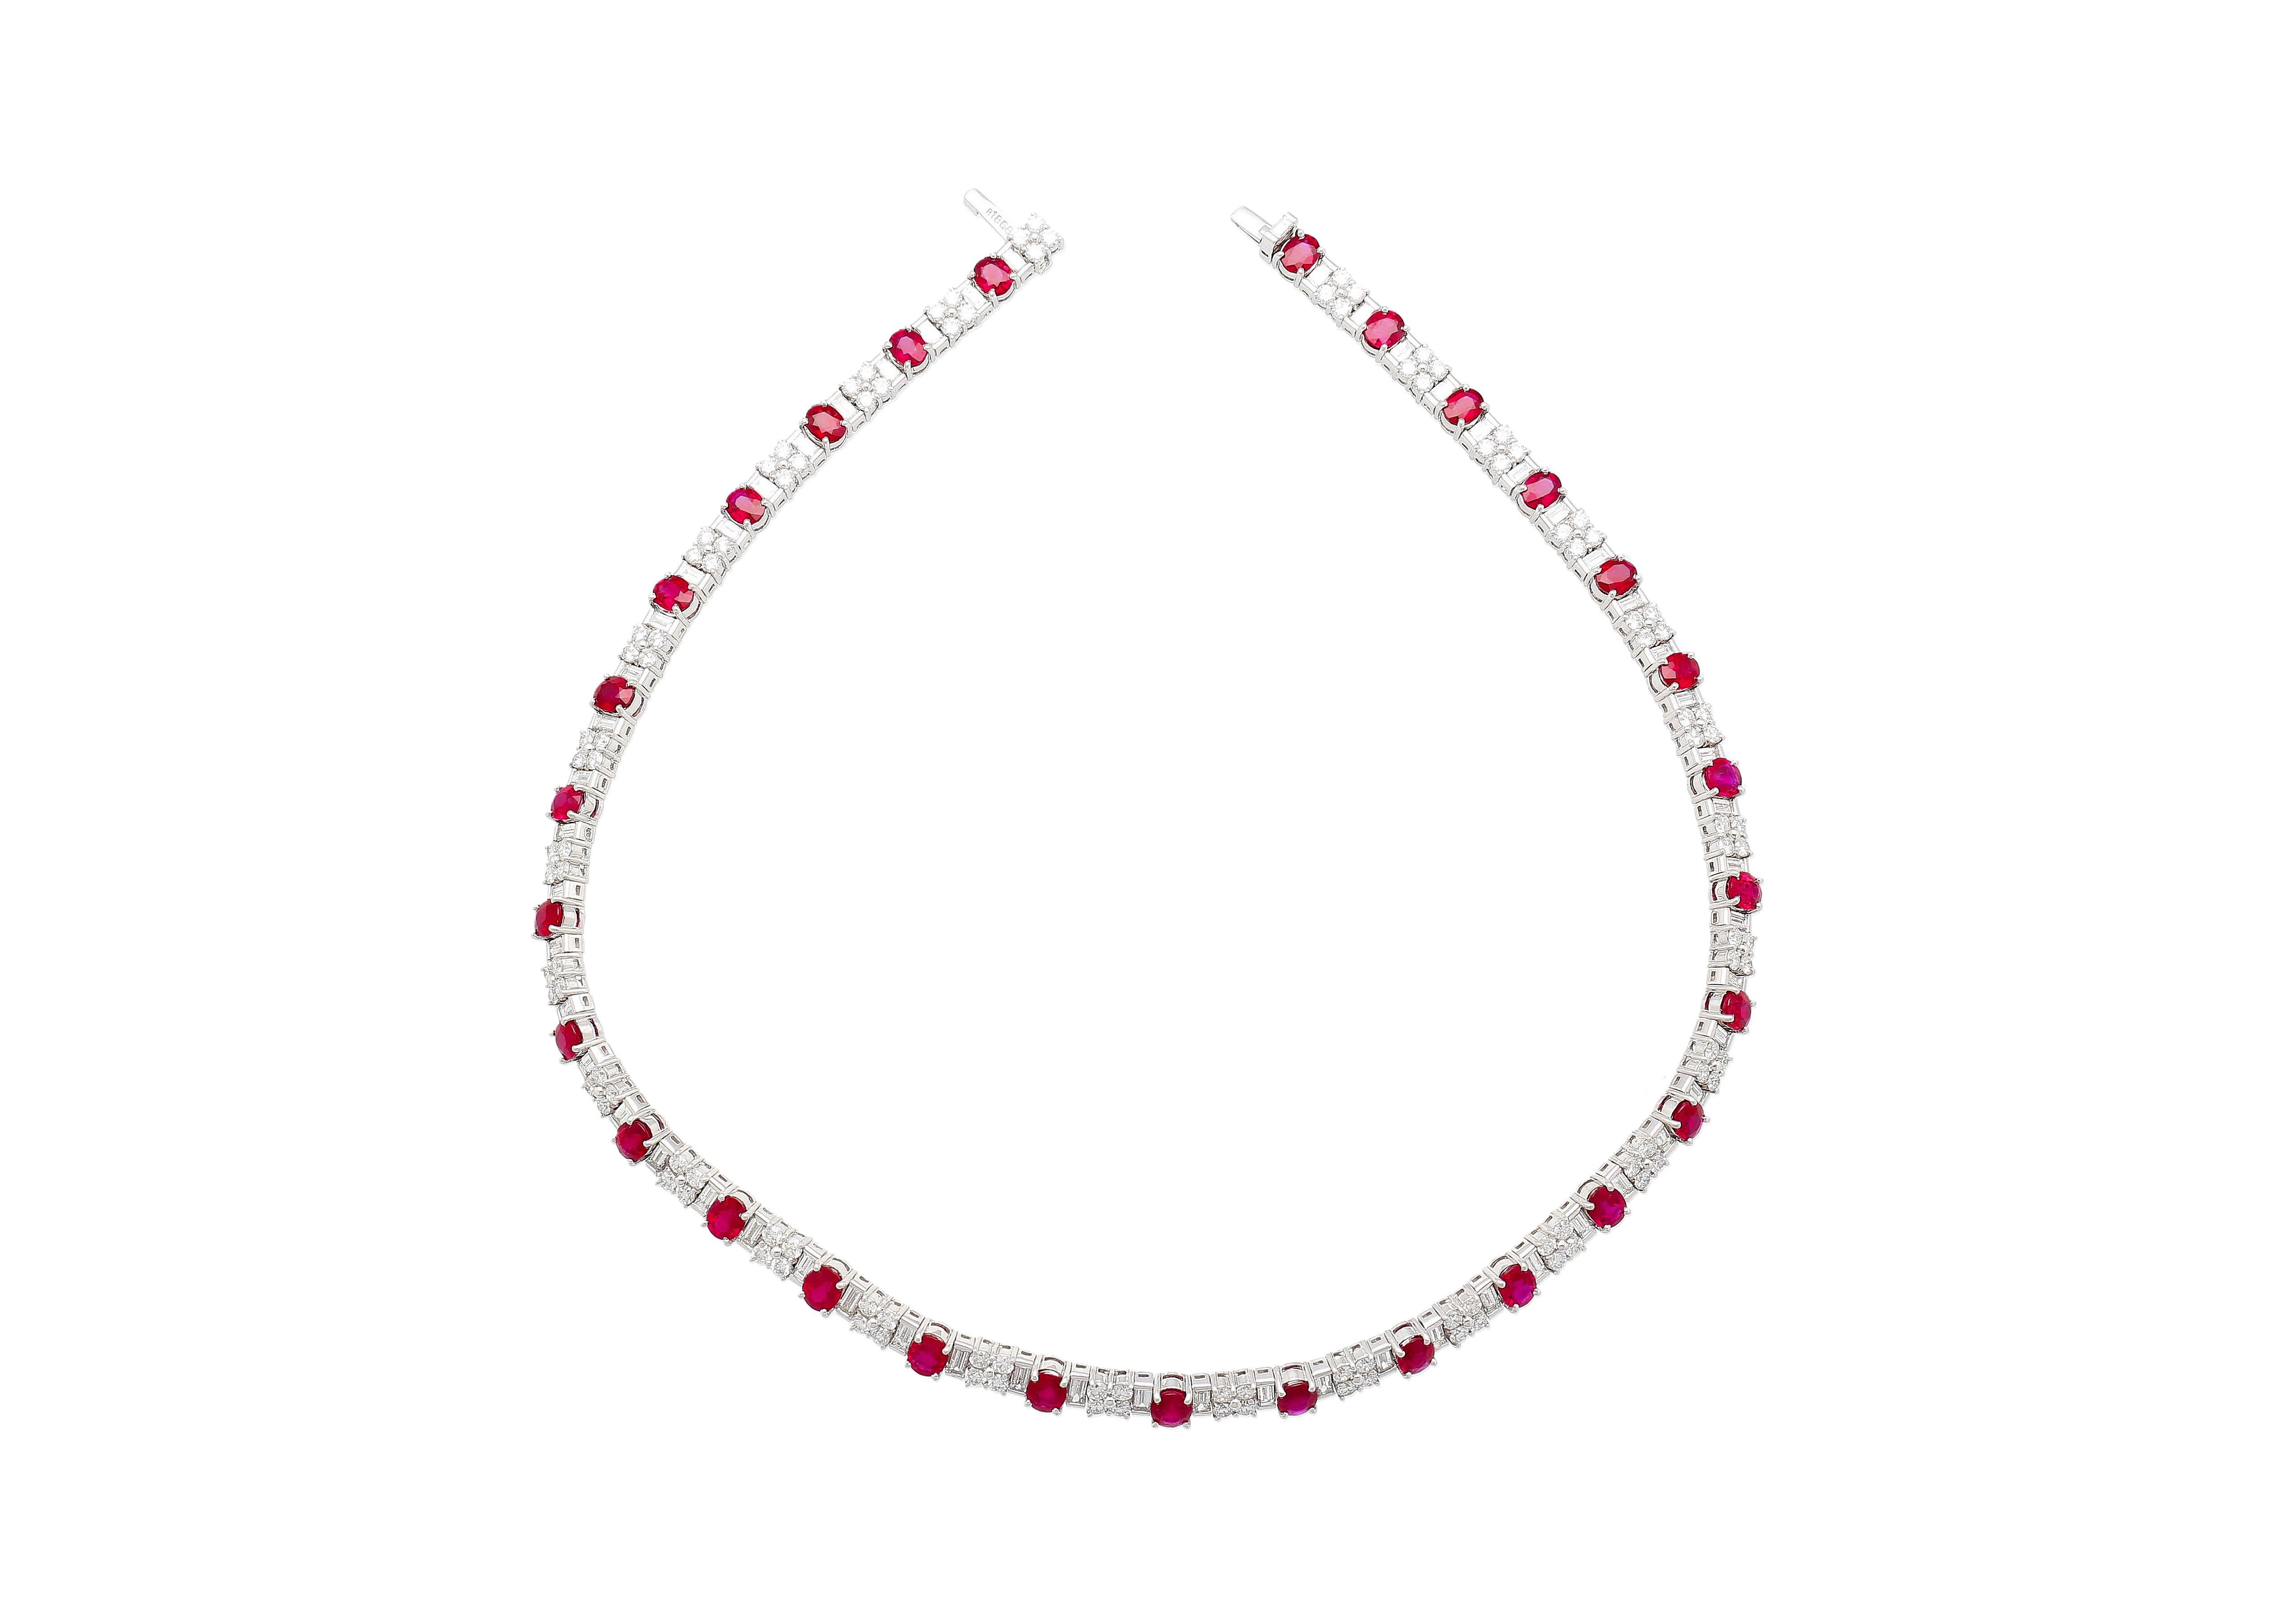 Art Deco 30 Carat Oval Cut Ruby & Mixed Cut Diamond Tennis Necklace in Platinum For Sale